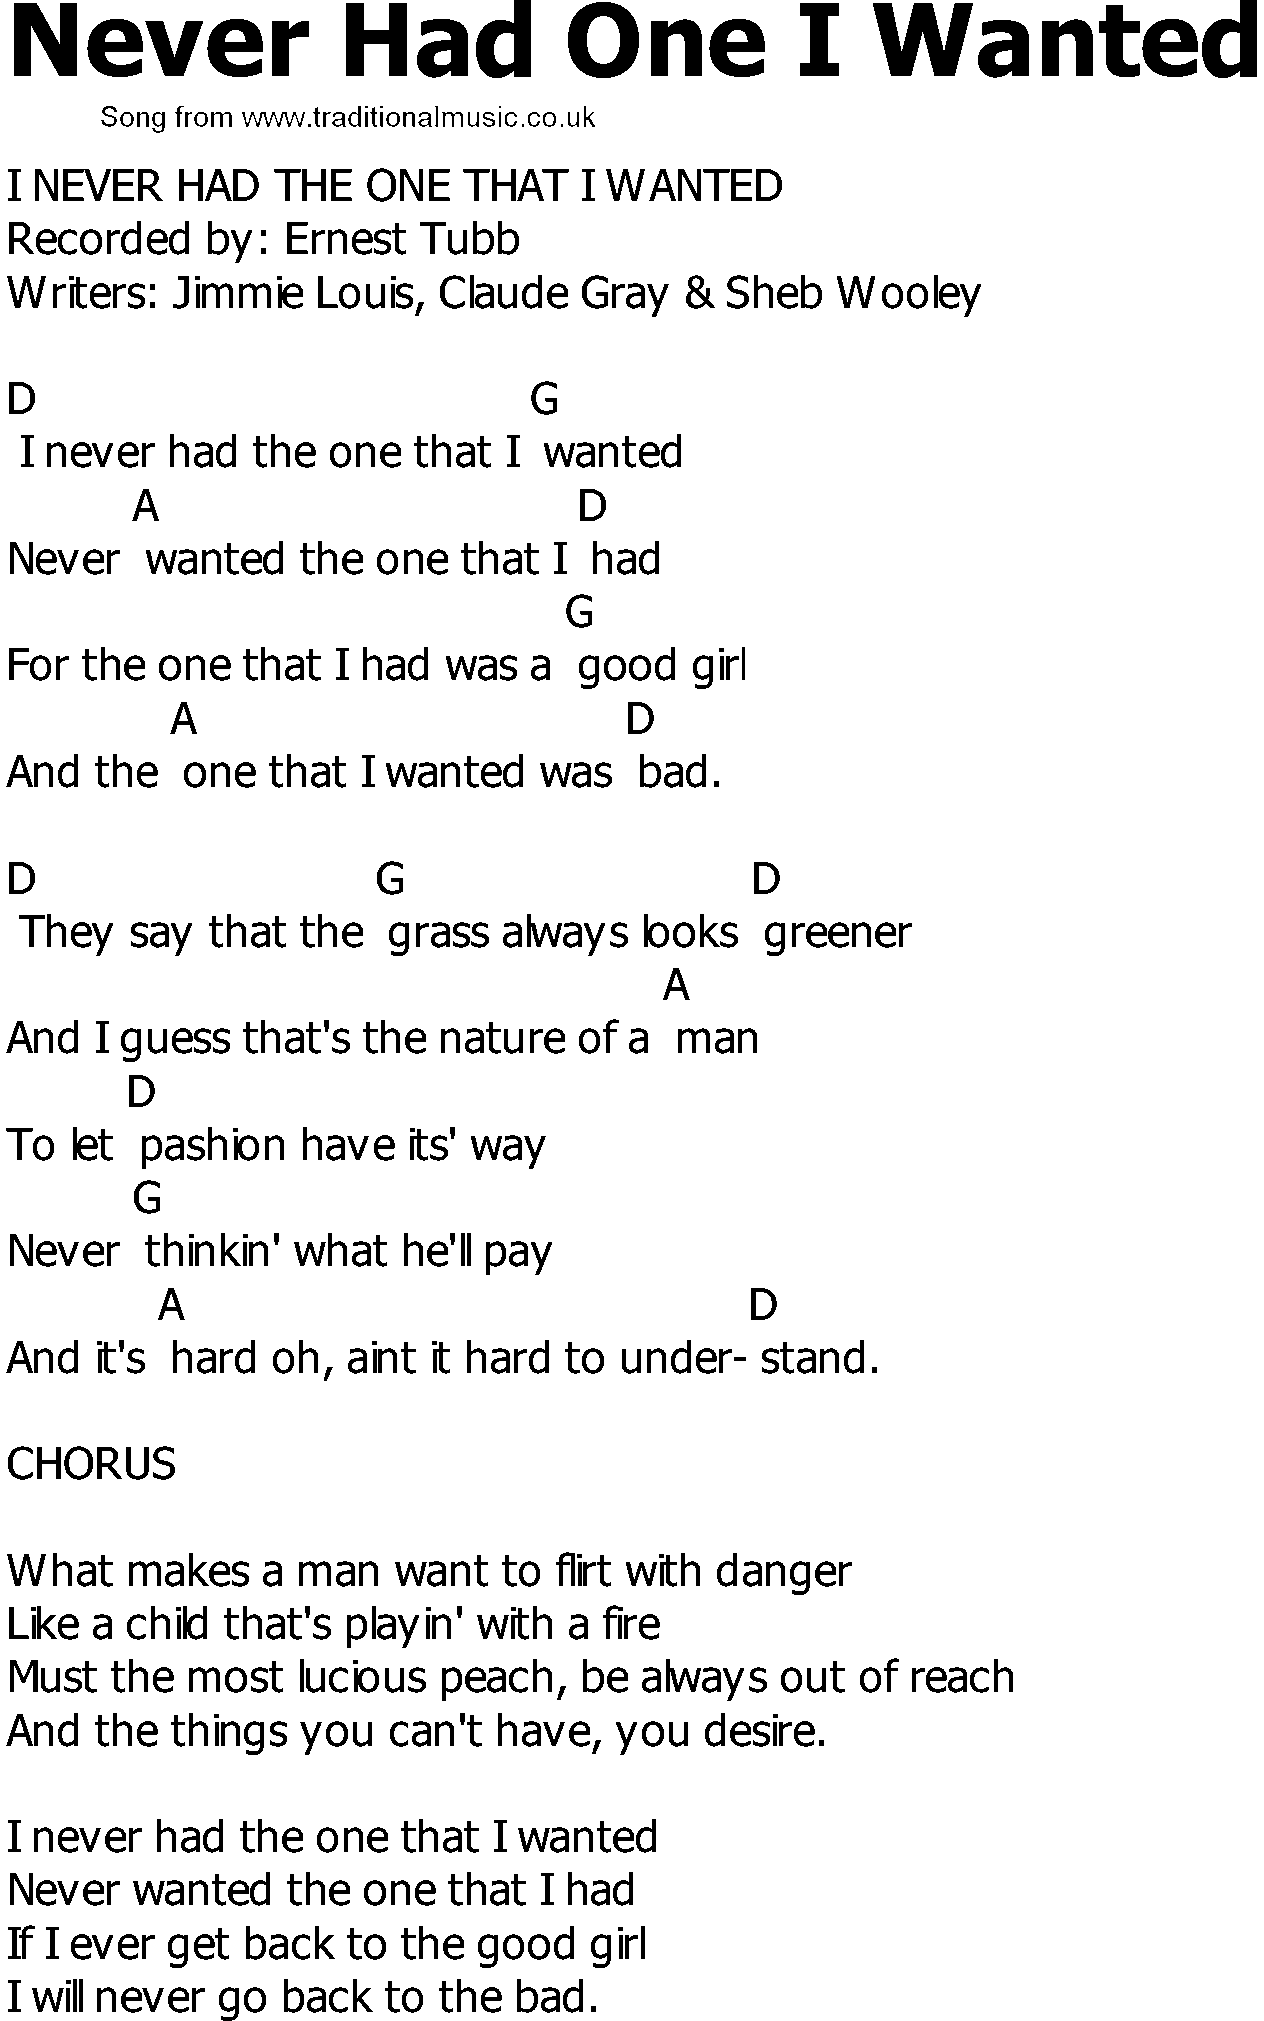 Old Country song lyrics with chords - Never Had One I Wanted